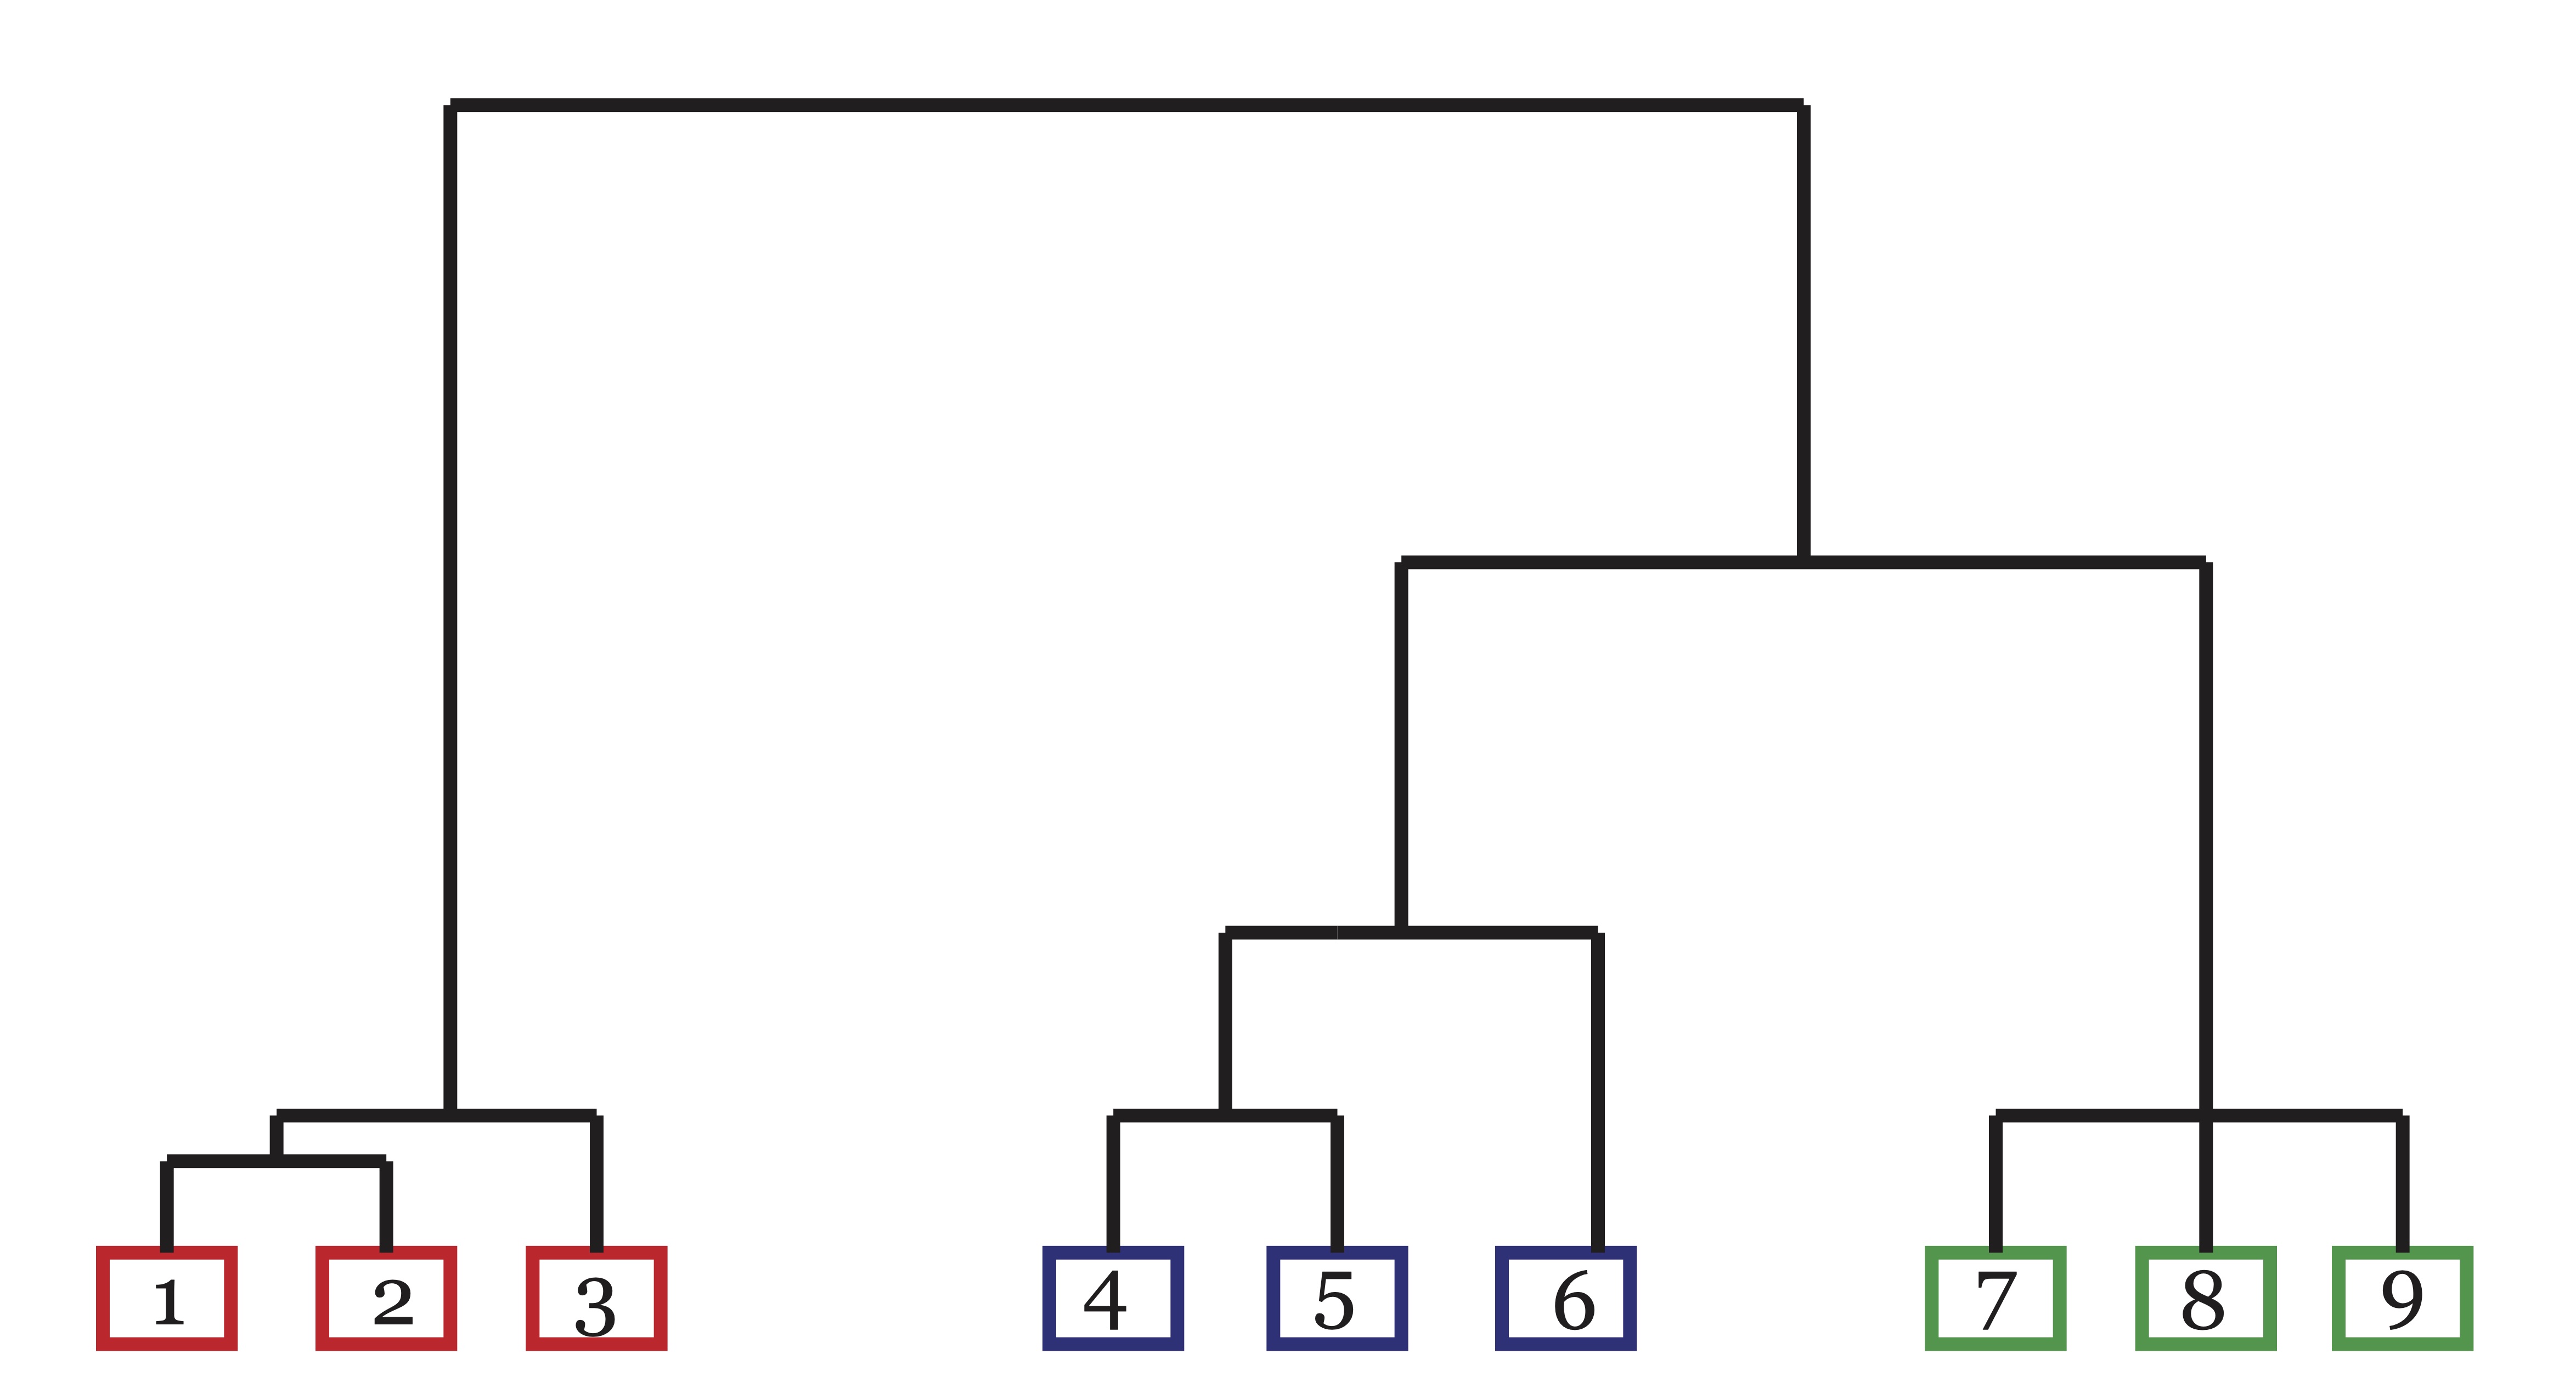 A Dendrogram exhibiting linkage/similarity between 9 objects in 3 clusters.